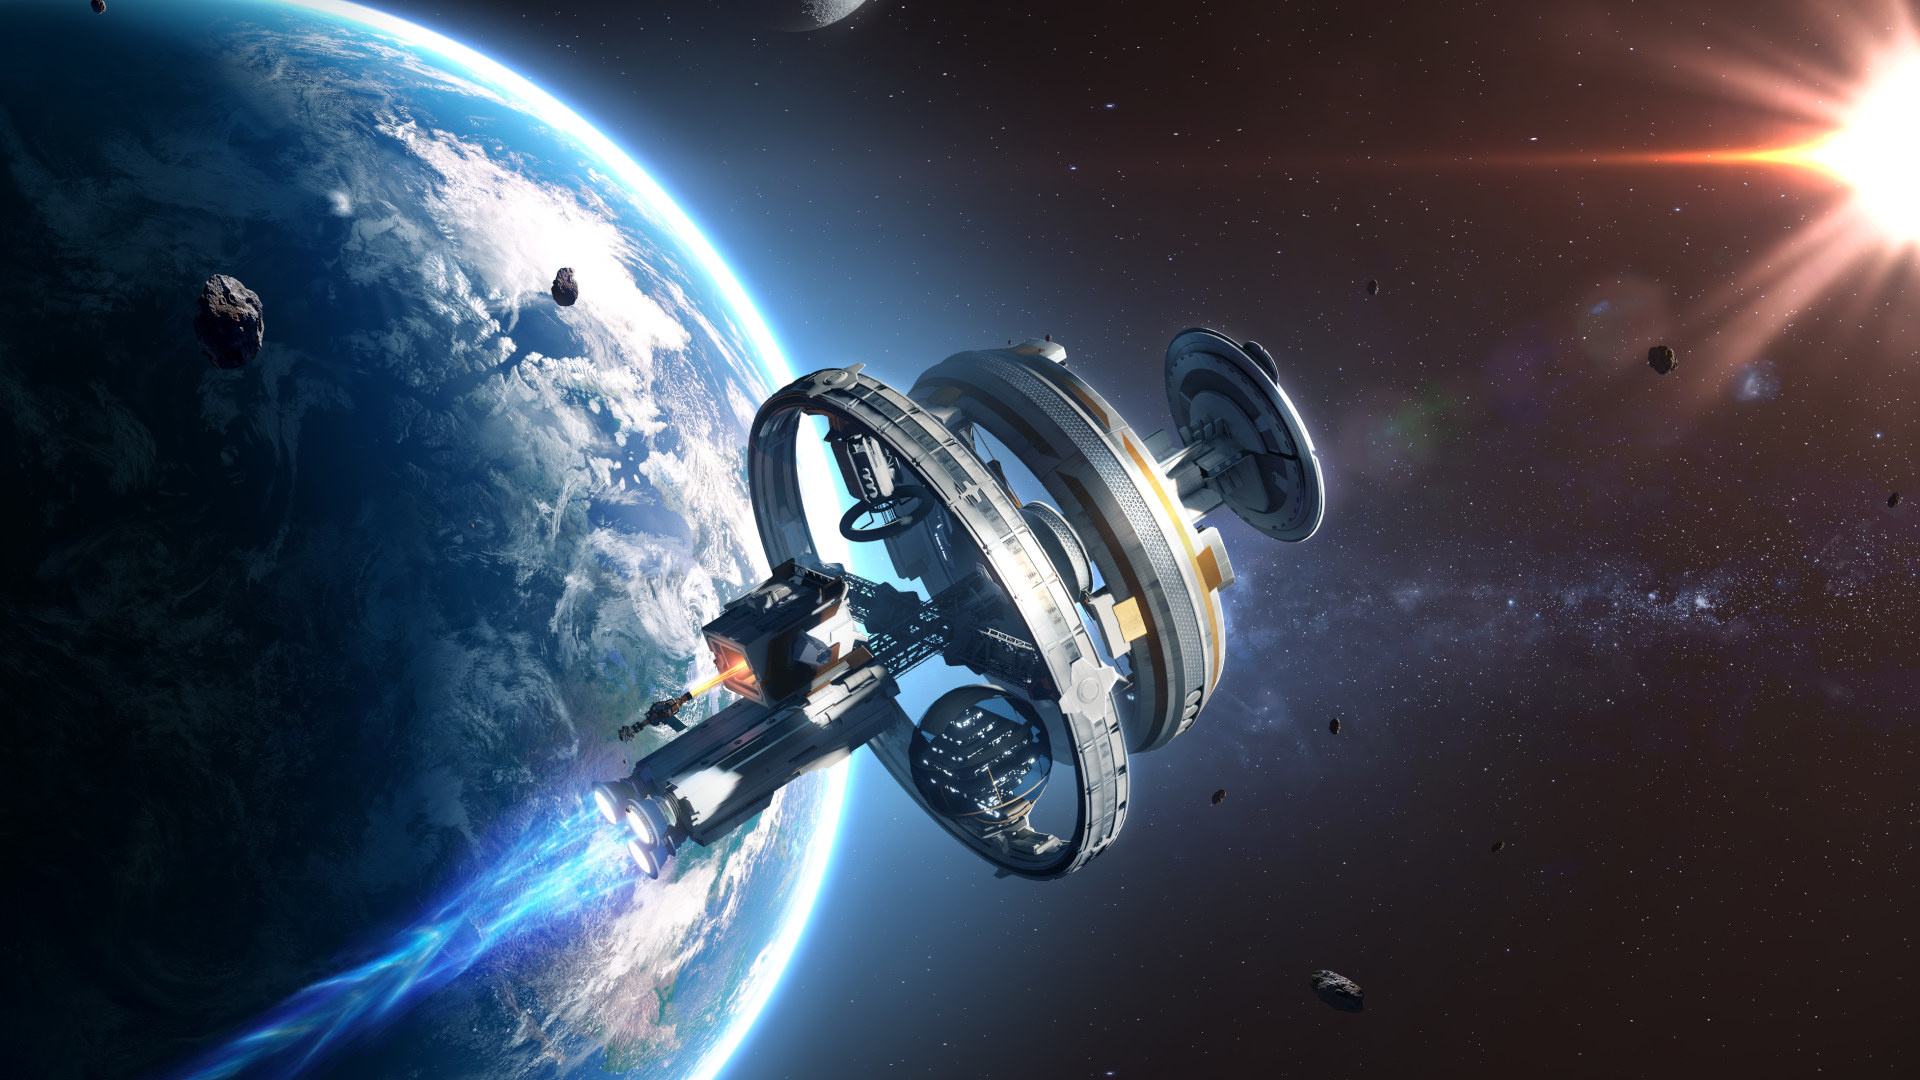 Ubisoft, VR space game, Agos: A Game of Space, Futuristic adventures, 1920x1080 Full HD Desktop